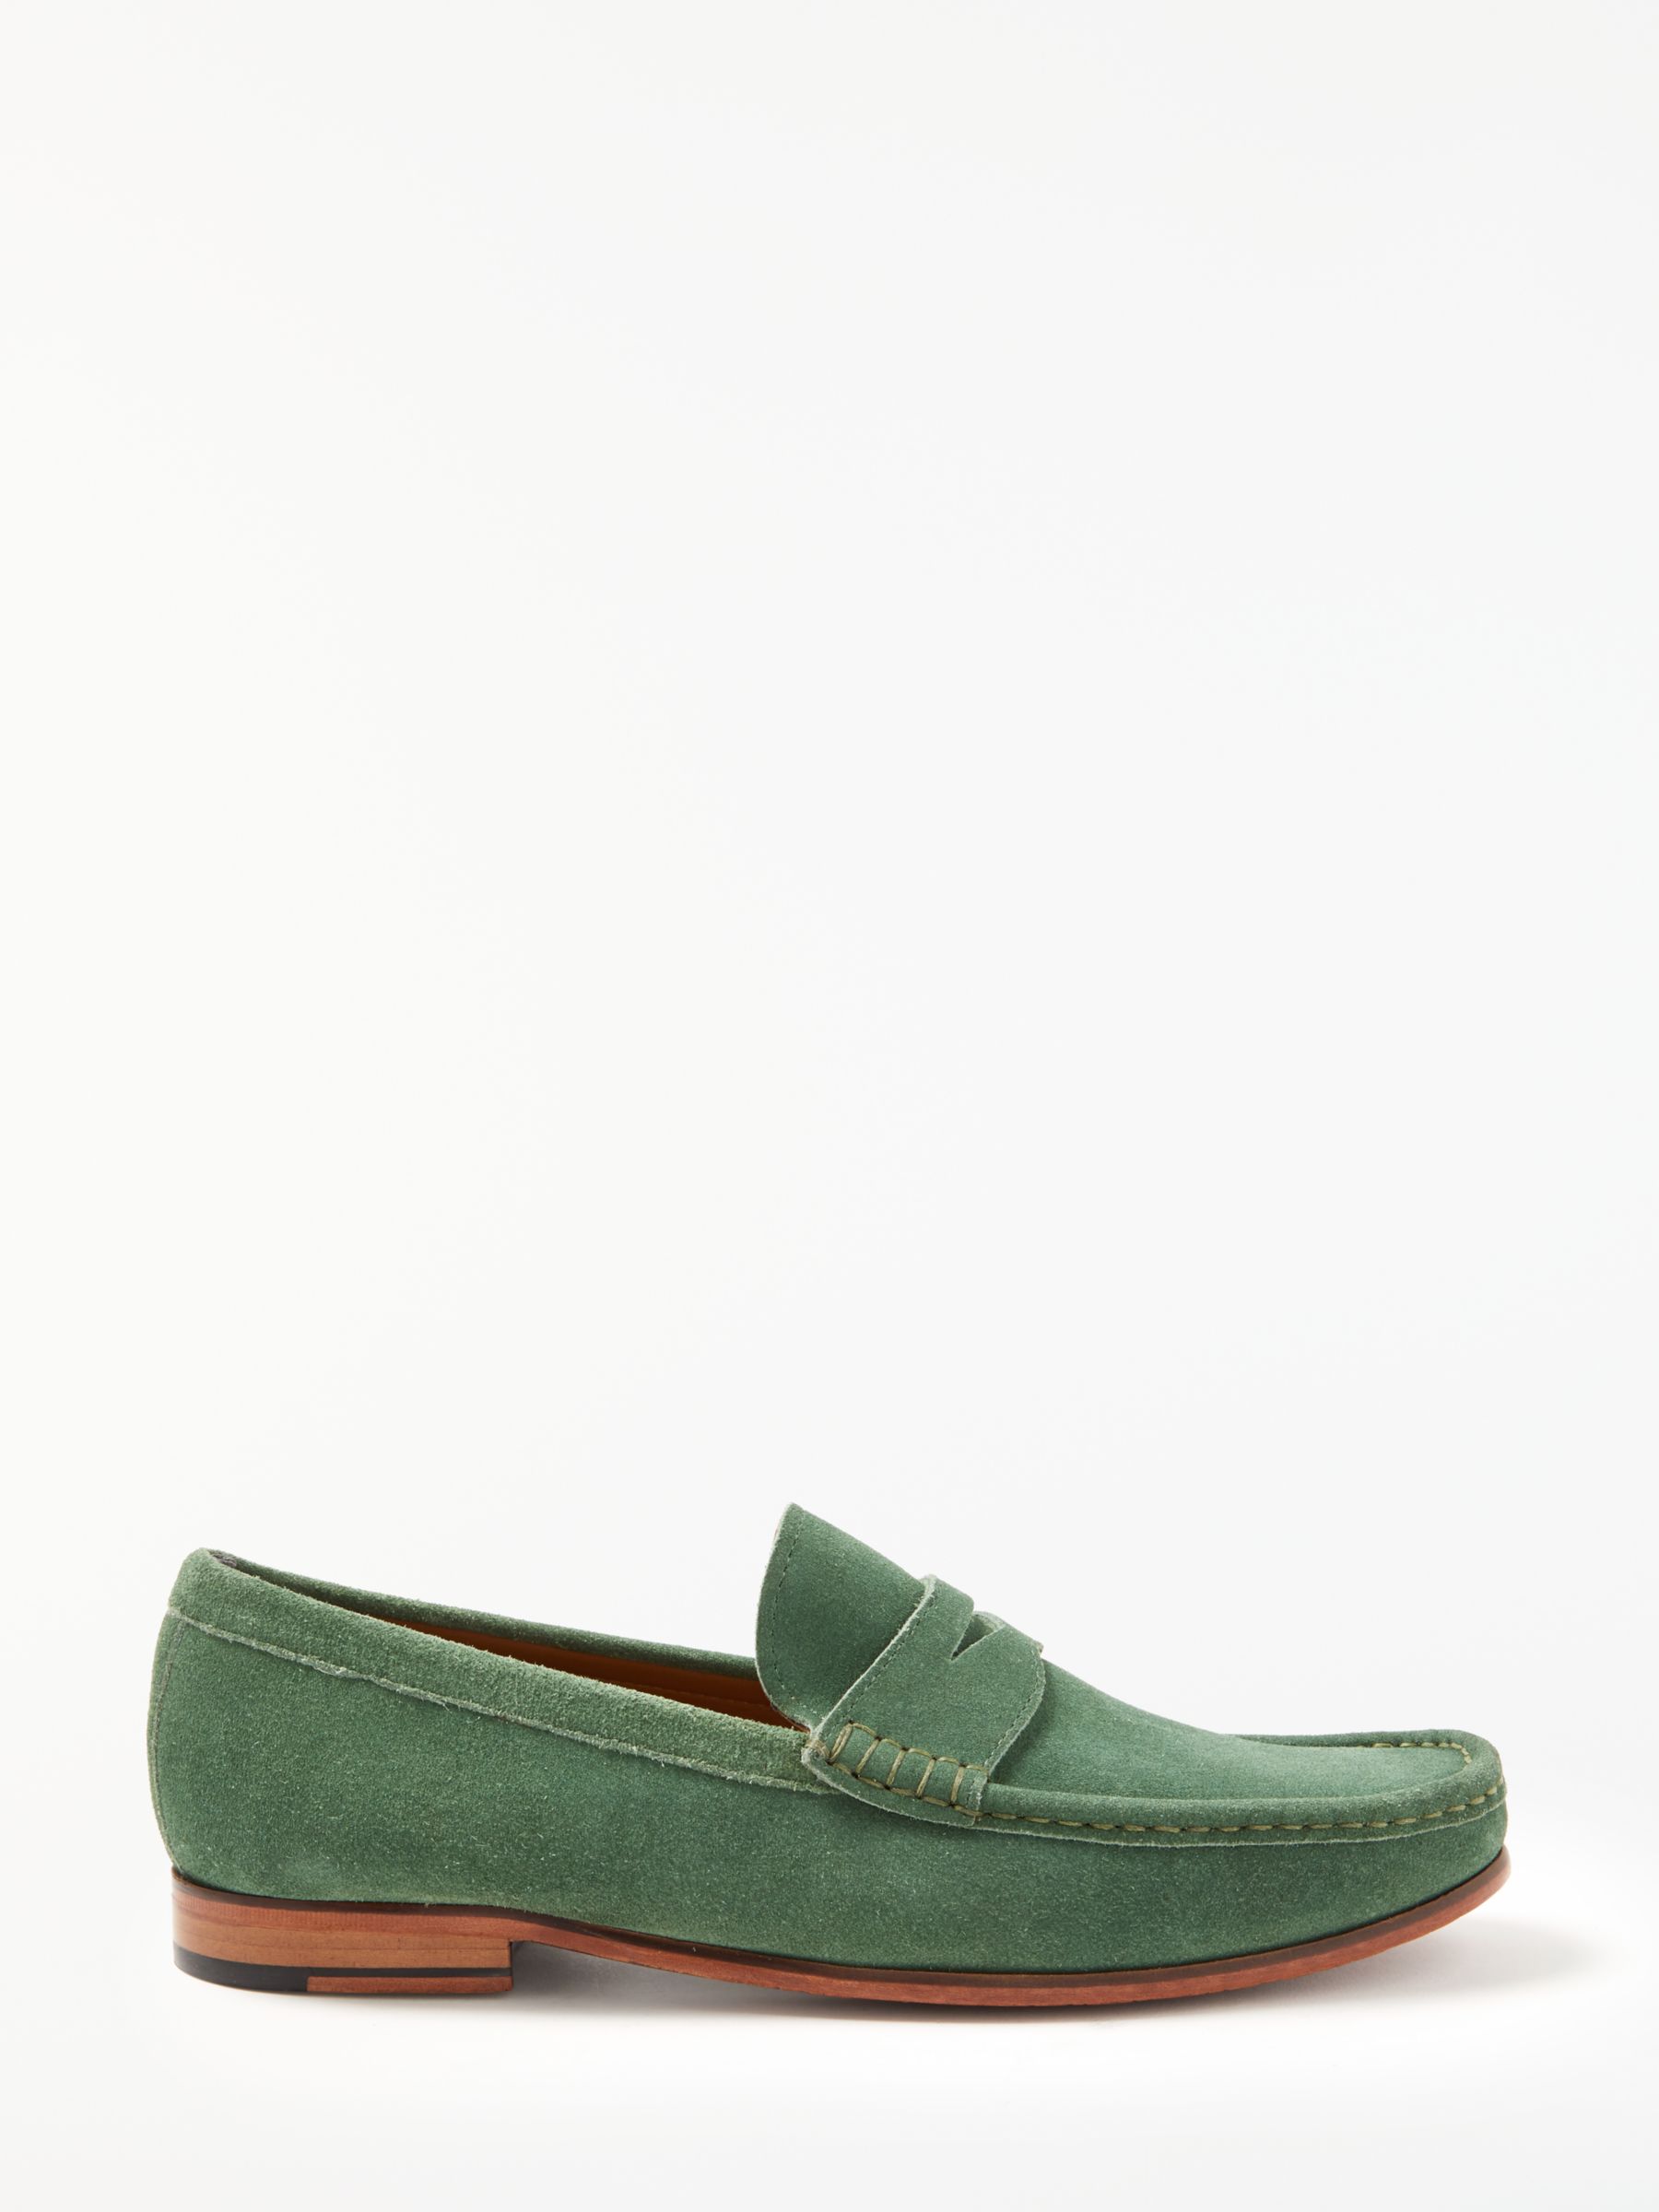 John Lewis & Partners Louis Suede Penny Loafers, Green, 9